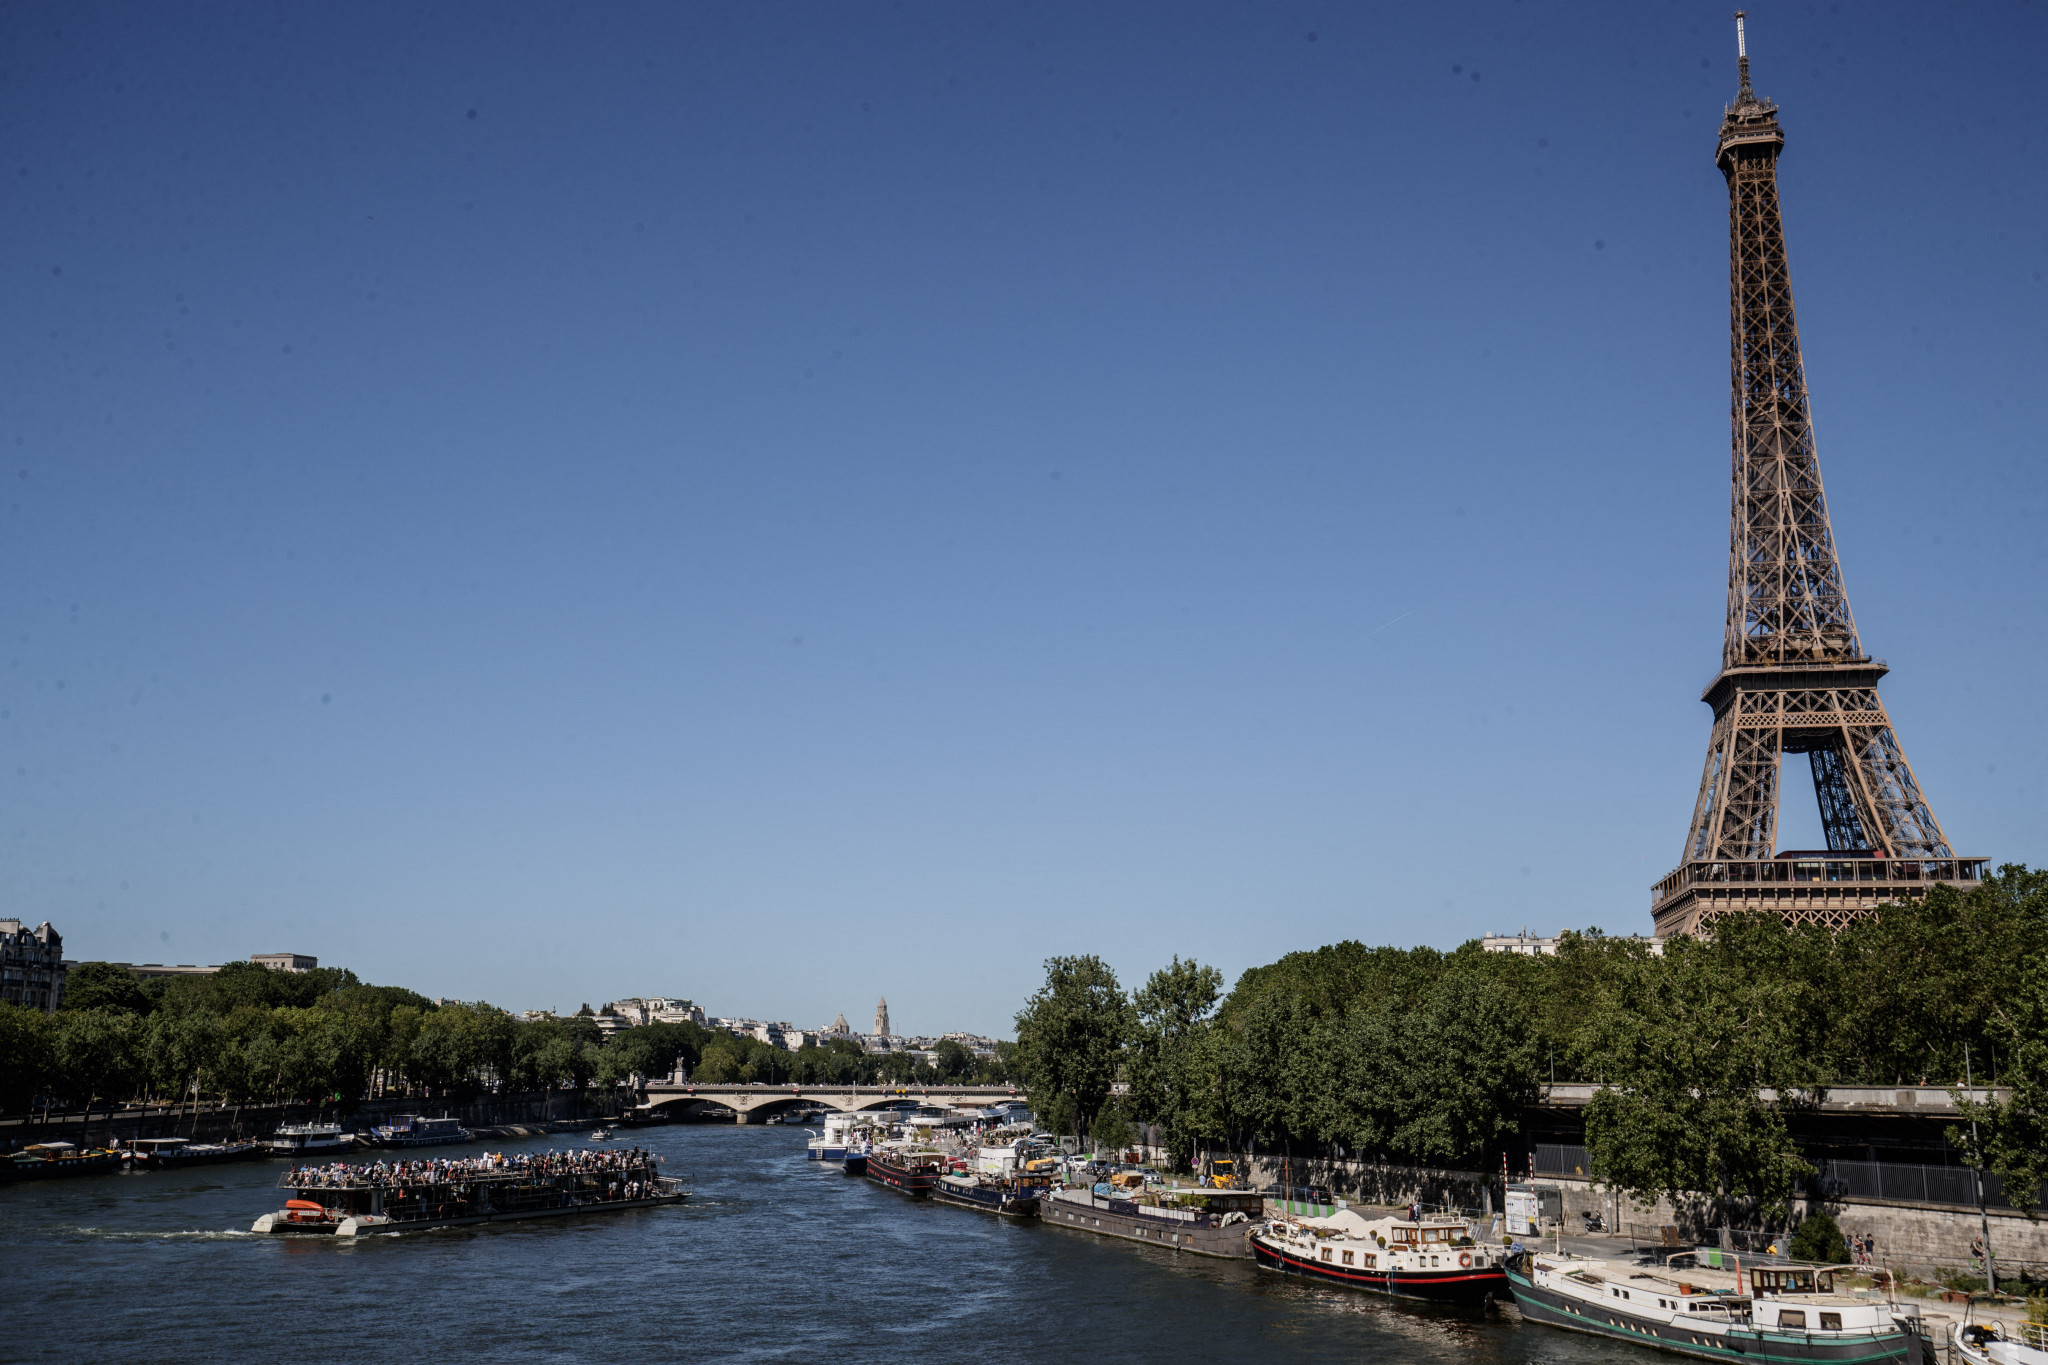 Paris 2024 organisers are pushing forward with having delegates travel by boat on the River Seine with 600,000 onlookers ©Getty Images